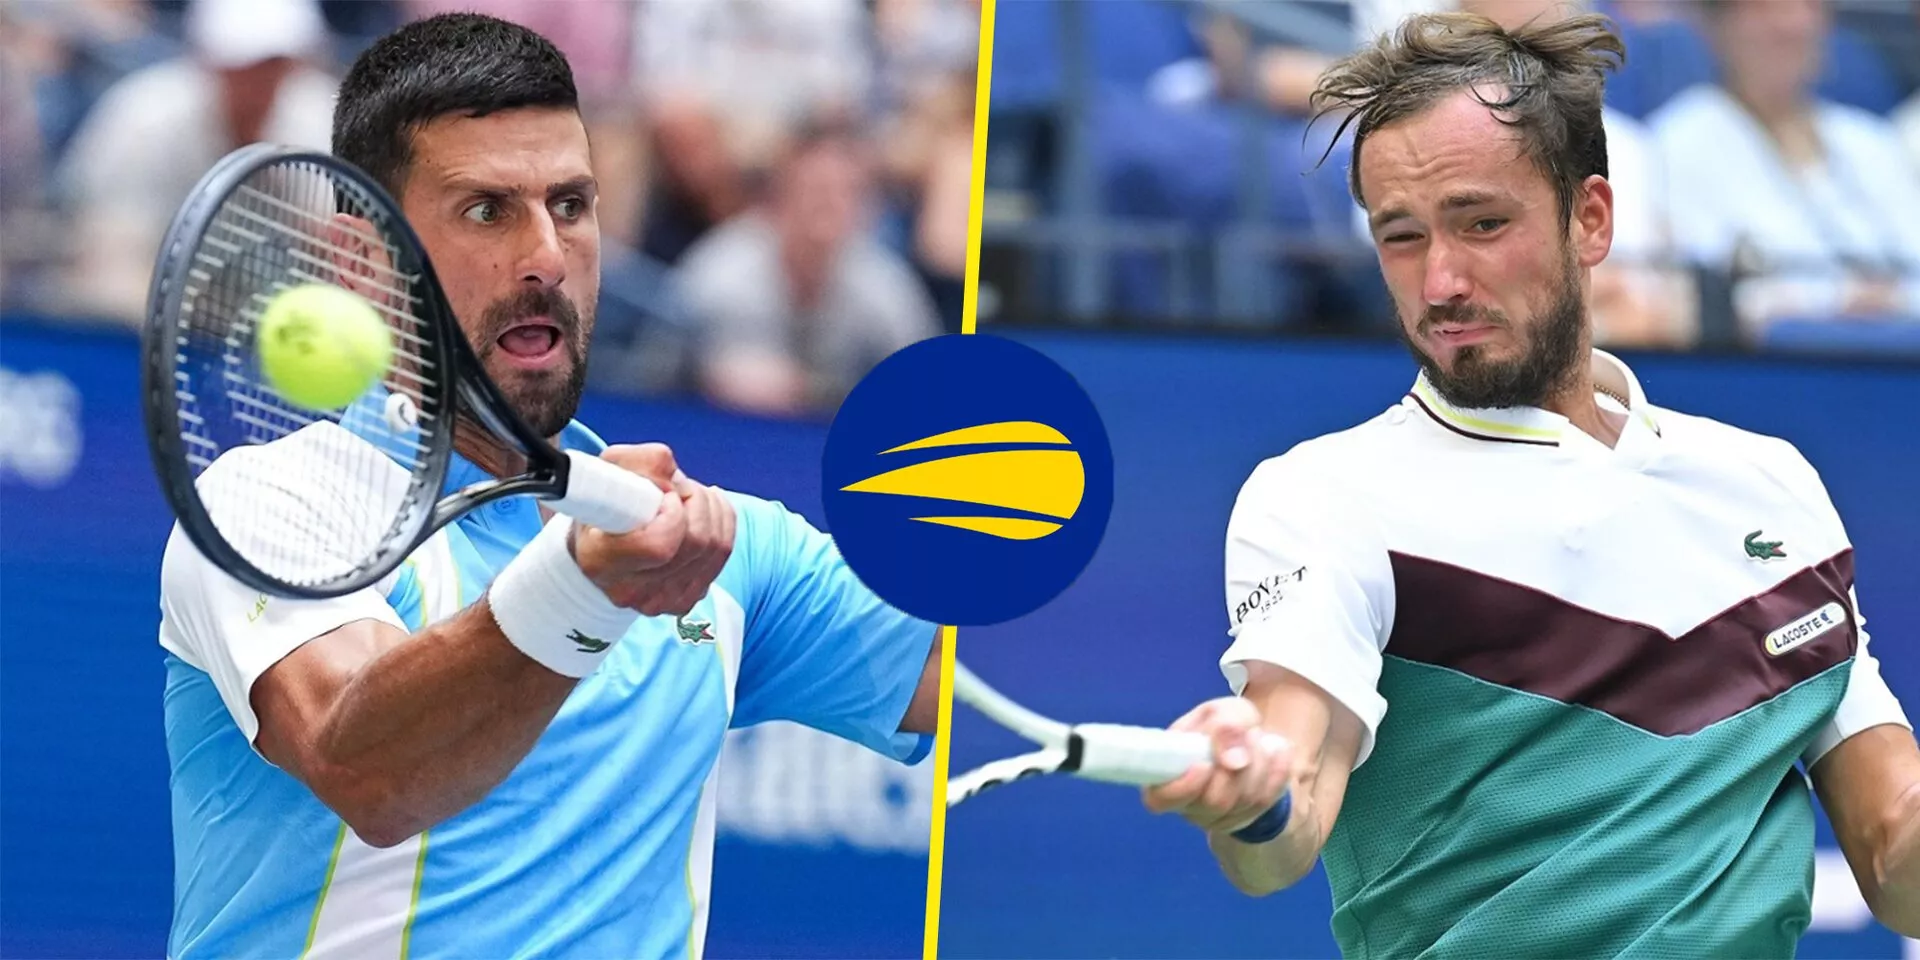 US Open 2023 Where and how to watch Novak Djokovic vs Daniil Medvedev final match live in India?